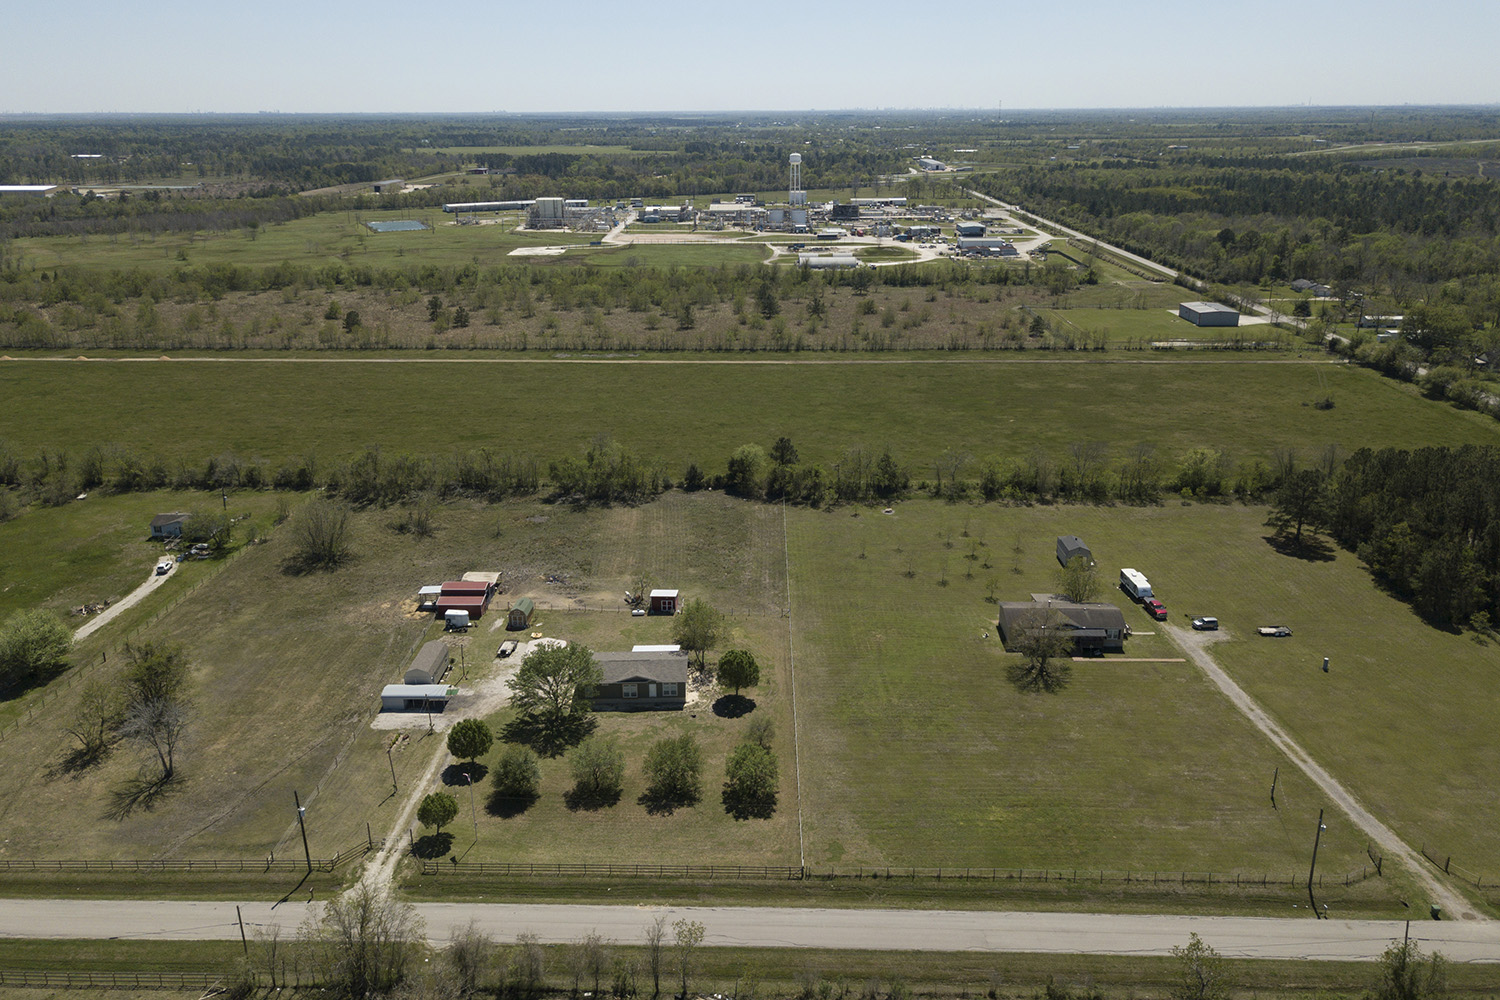 Homes in view of the Arkema chemical plant in Crosby, Texas.